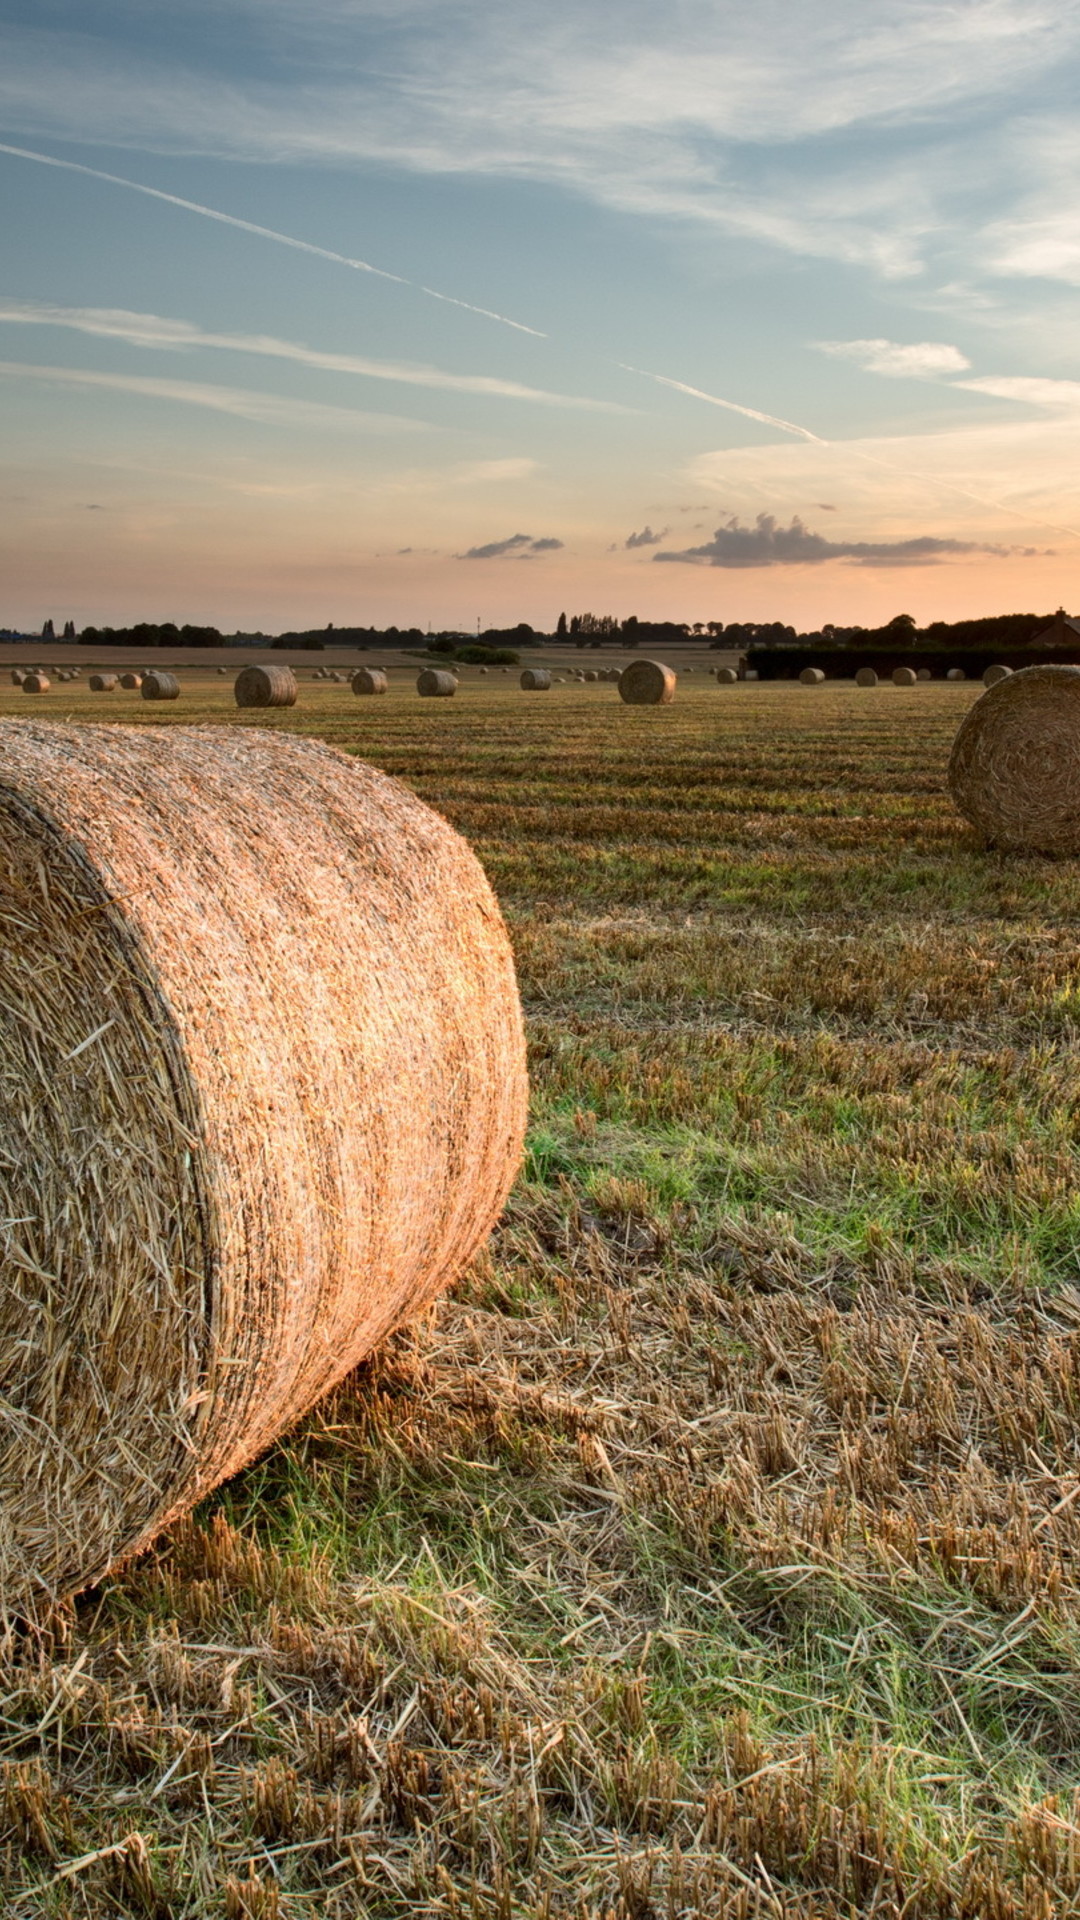 Field filled with bales of hay Wallpaper Download 1080x1920